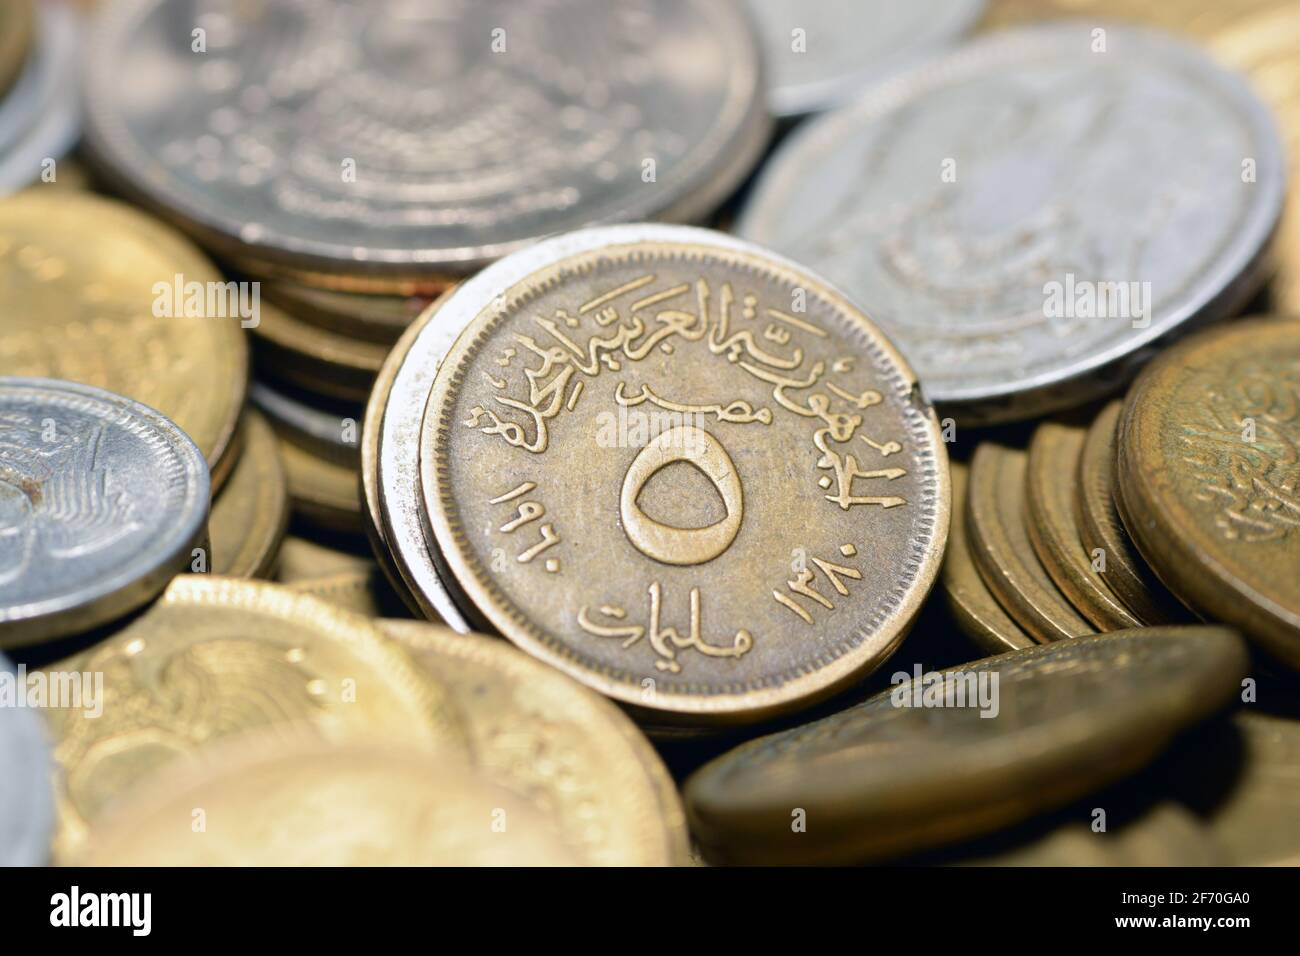 five milliemes coin 1960, old Egyptian money of 5 milliemes coin the currency of the United Arab Republic of Egypt and Syria, Vintage retro Stock Photo